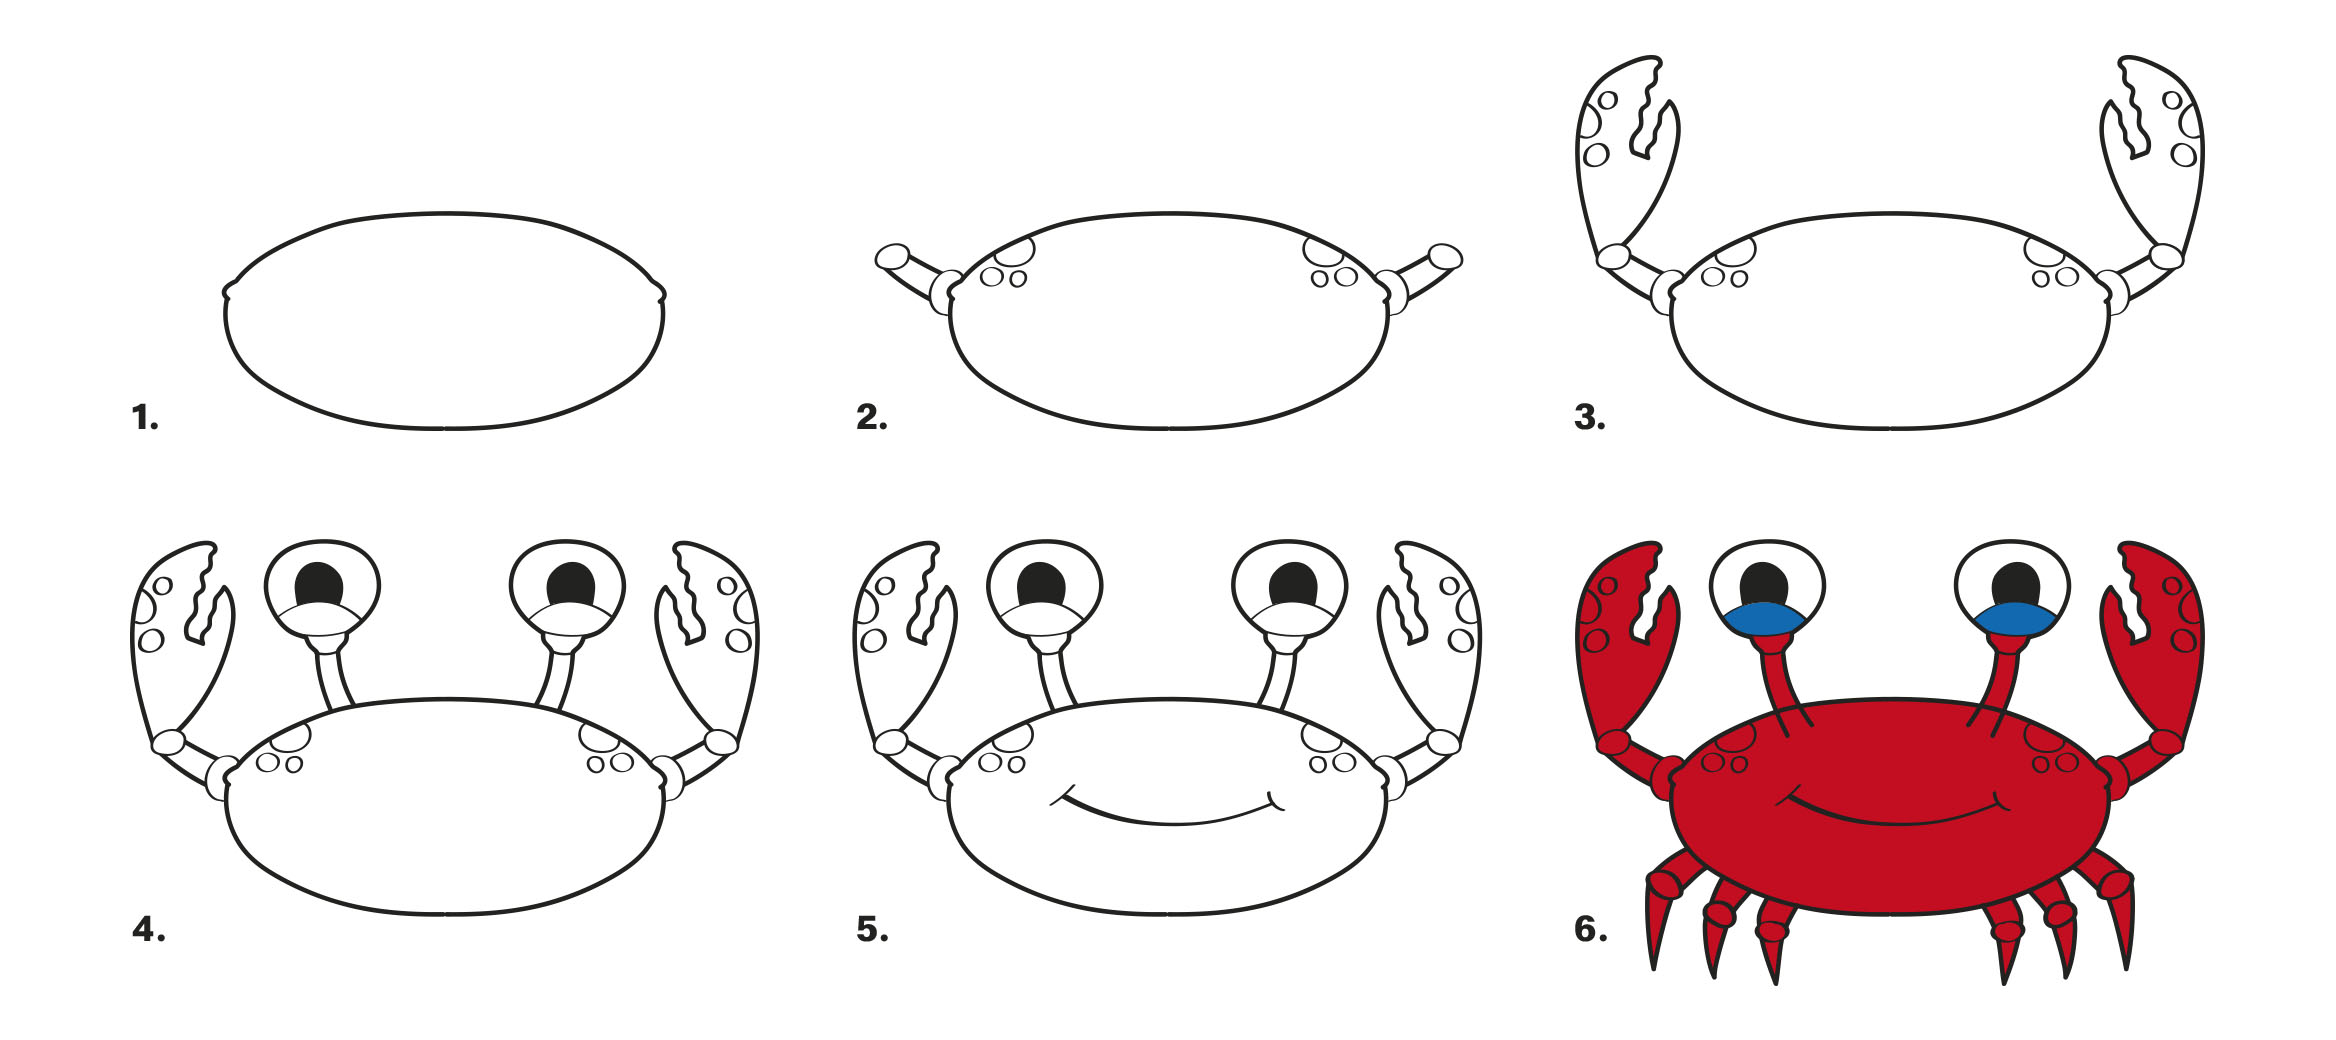 Your child can learn how to draw a crab by following the step by step guide provided!